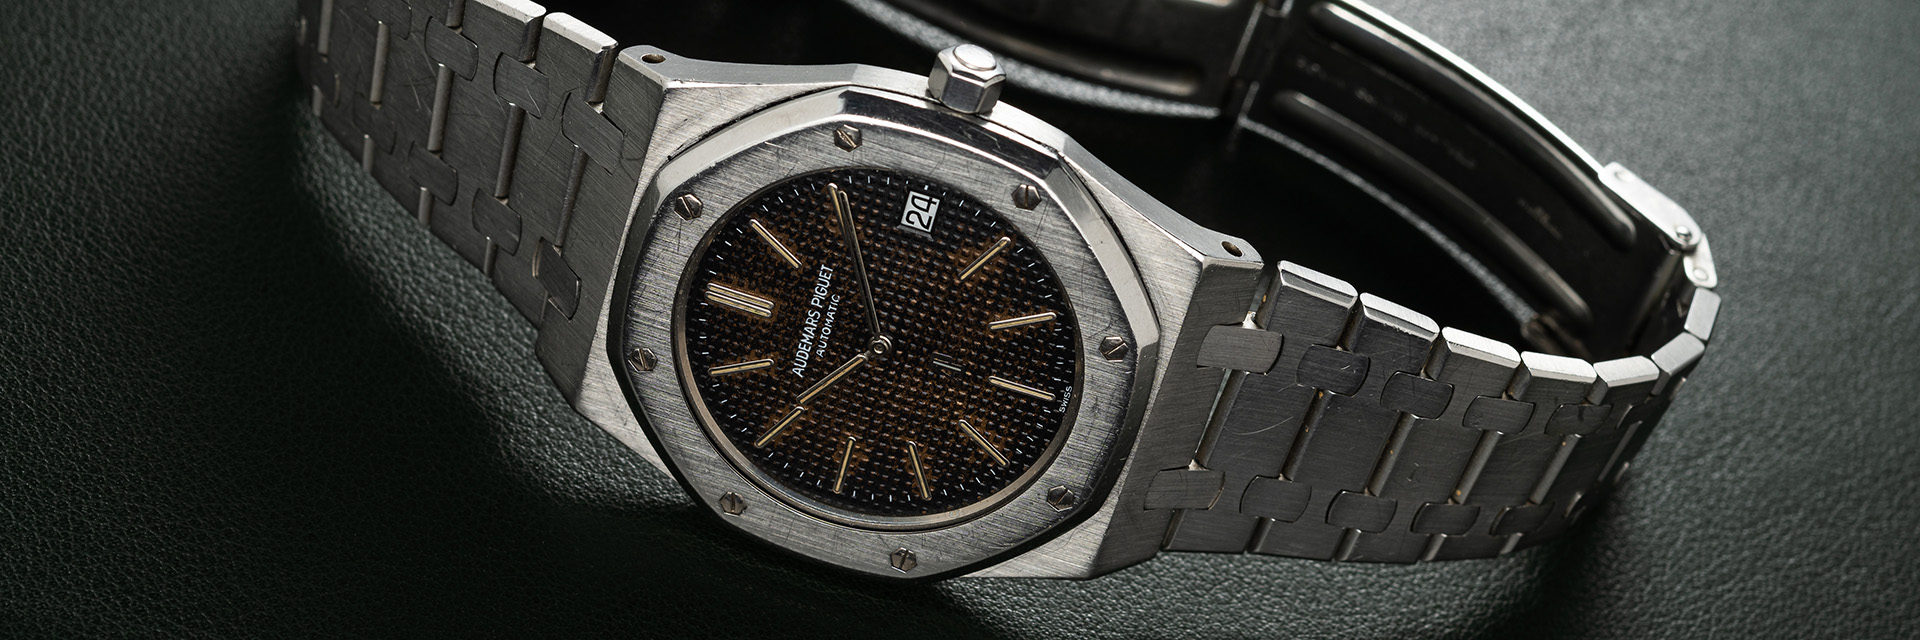 SOLD - AP Royal Oak Jumbo 5402ST With 'Tropical' Dial